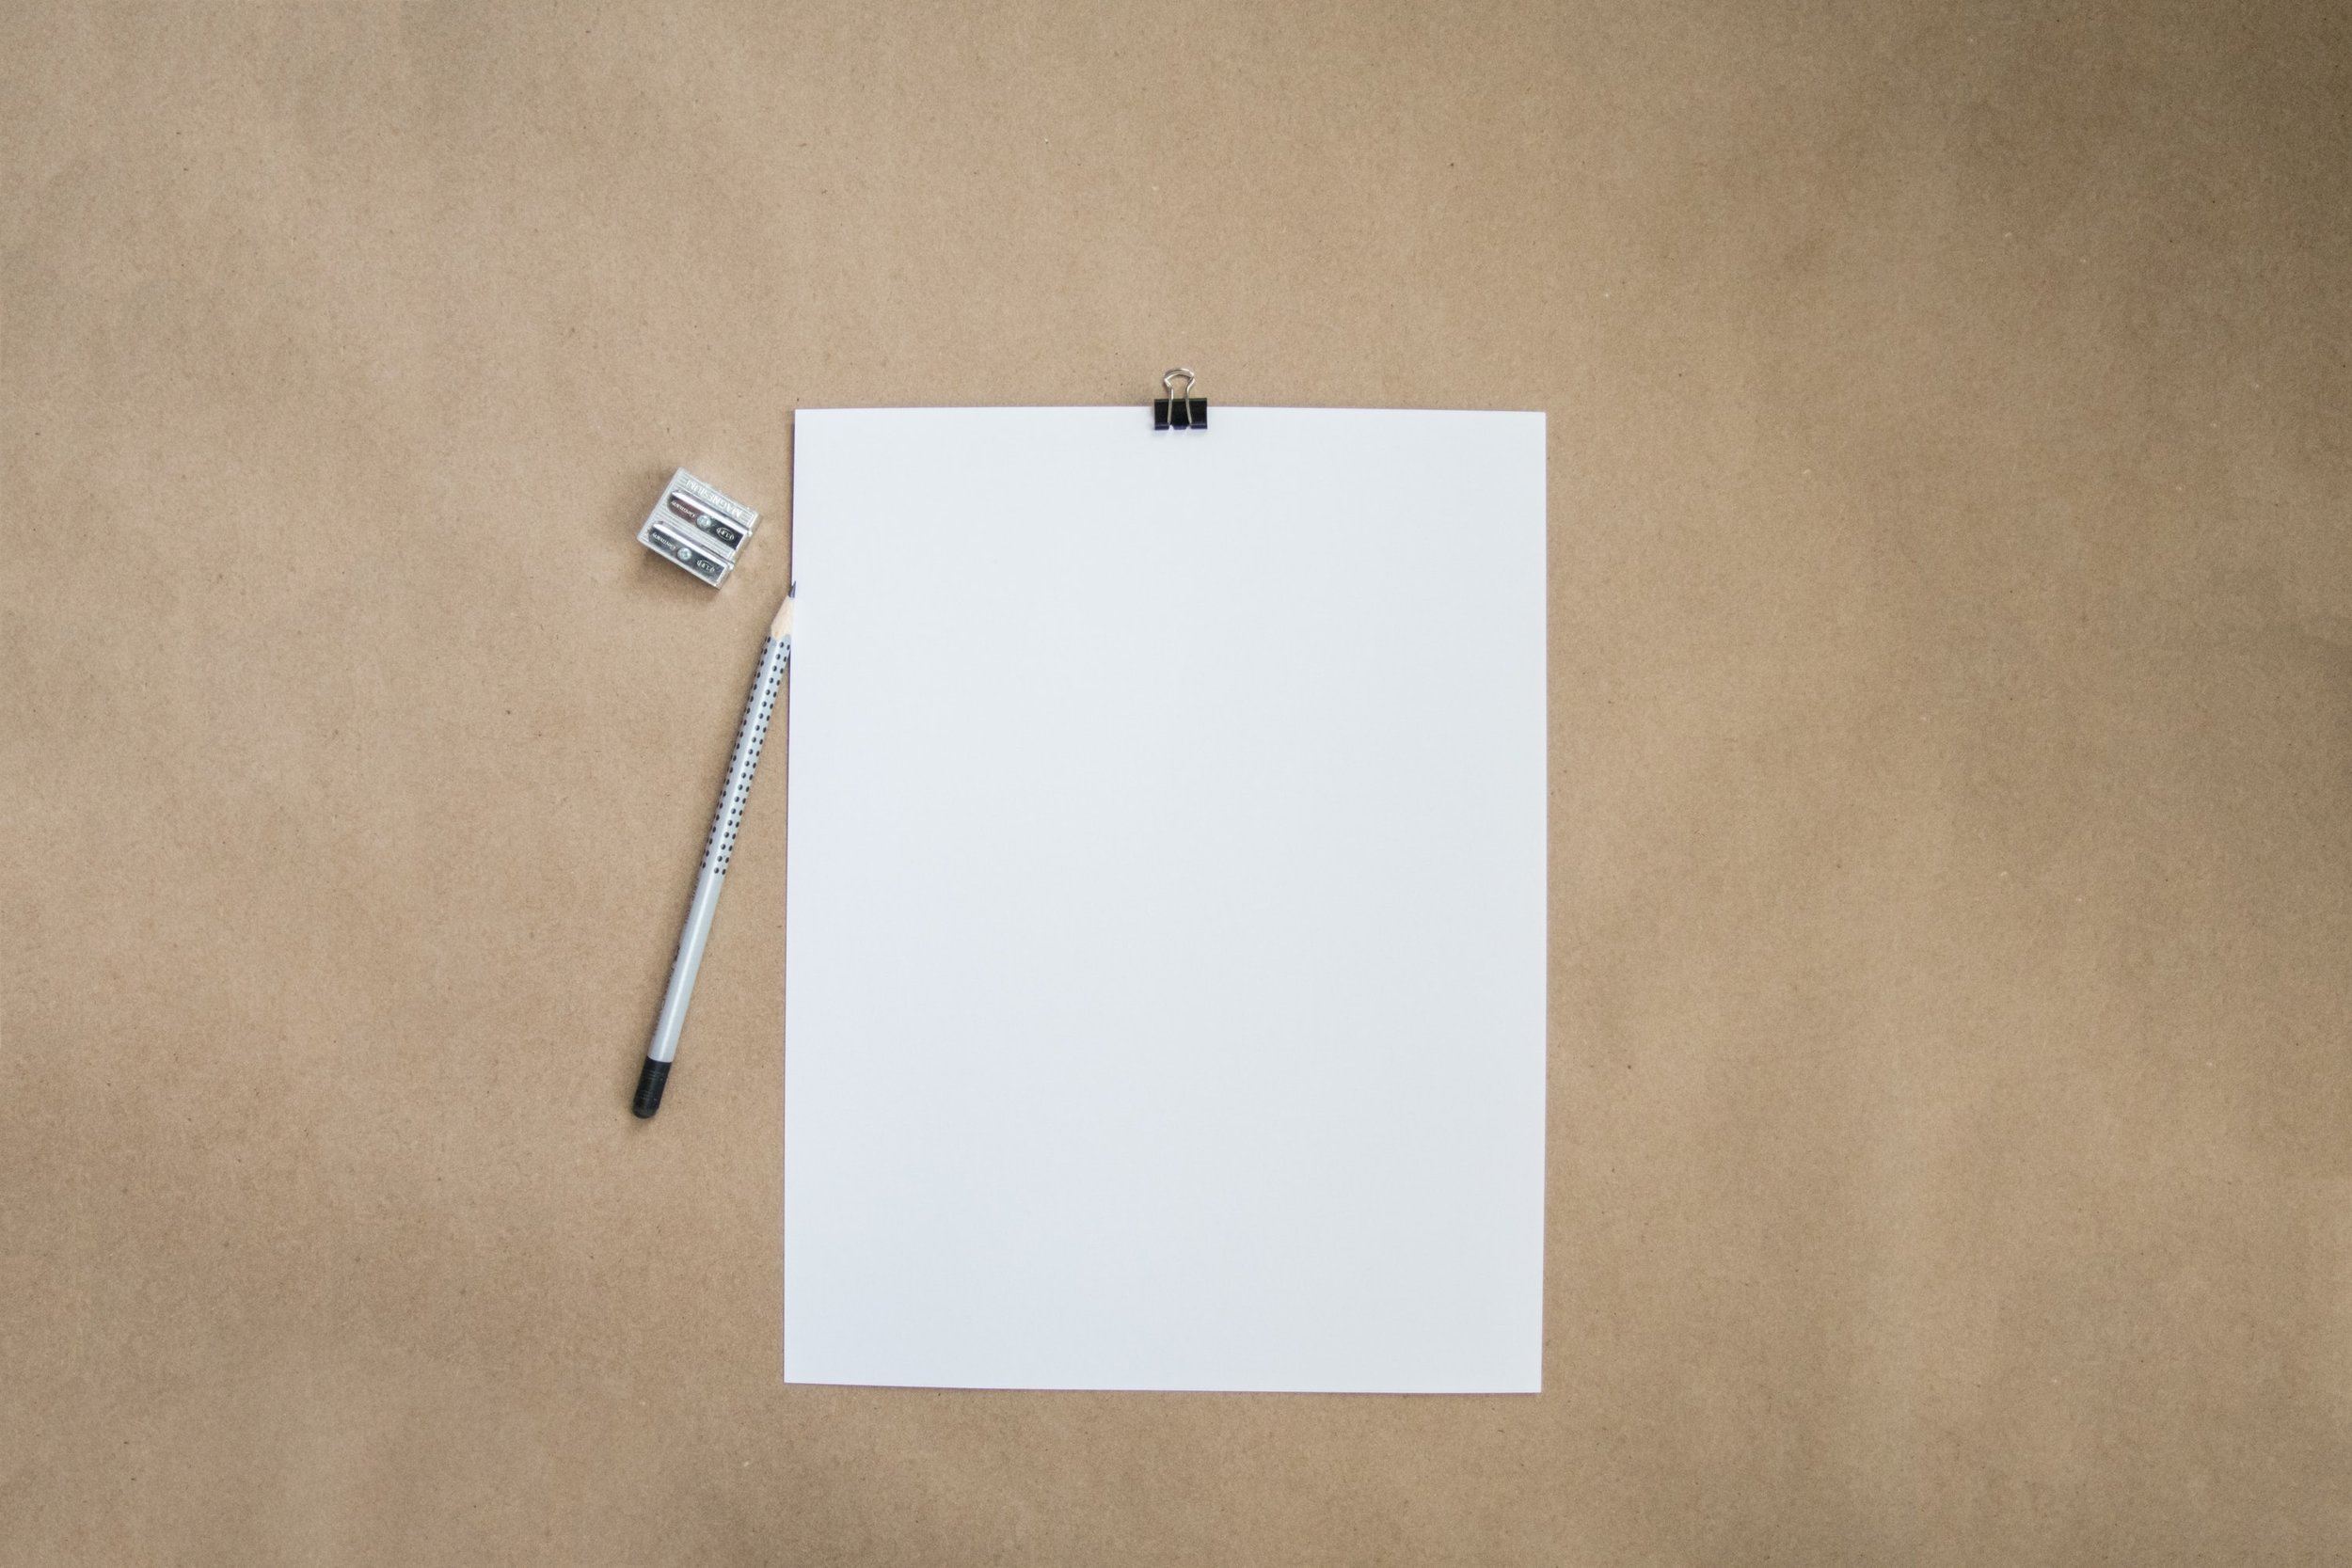 image of empty paper and pencil